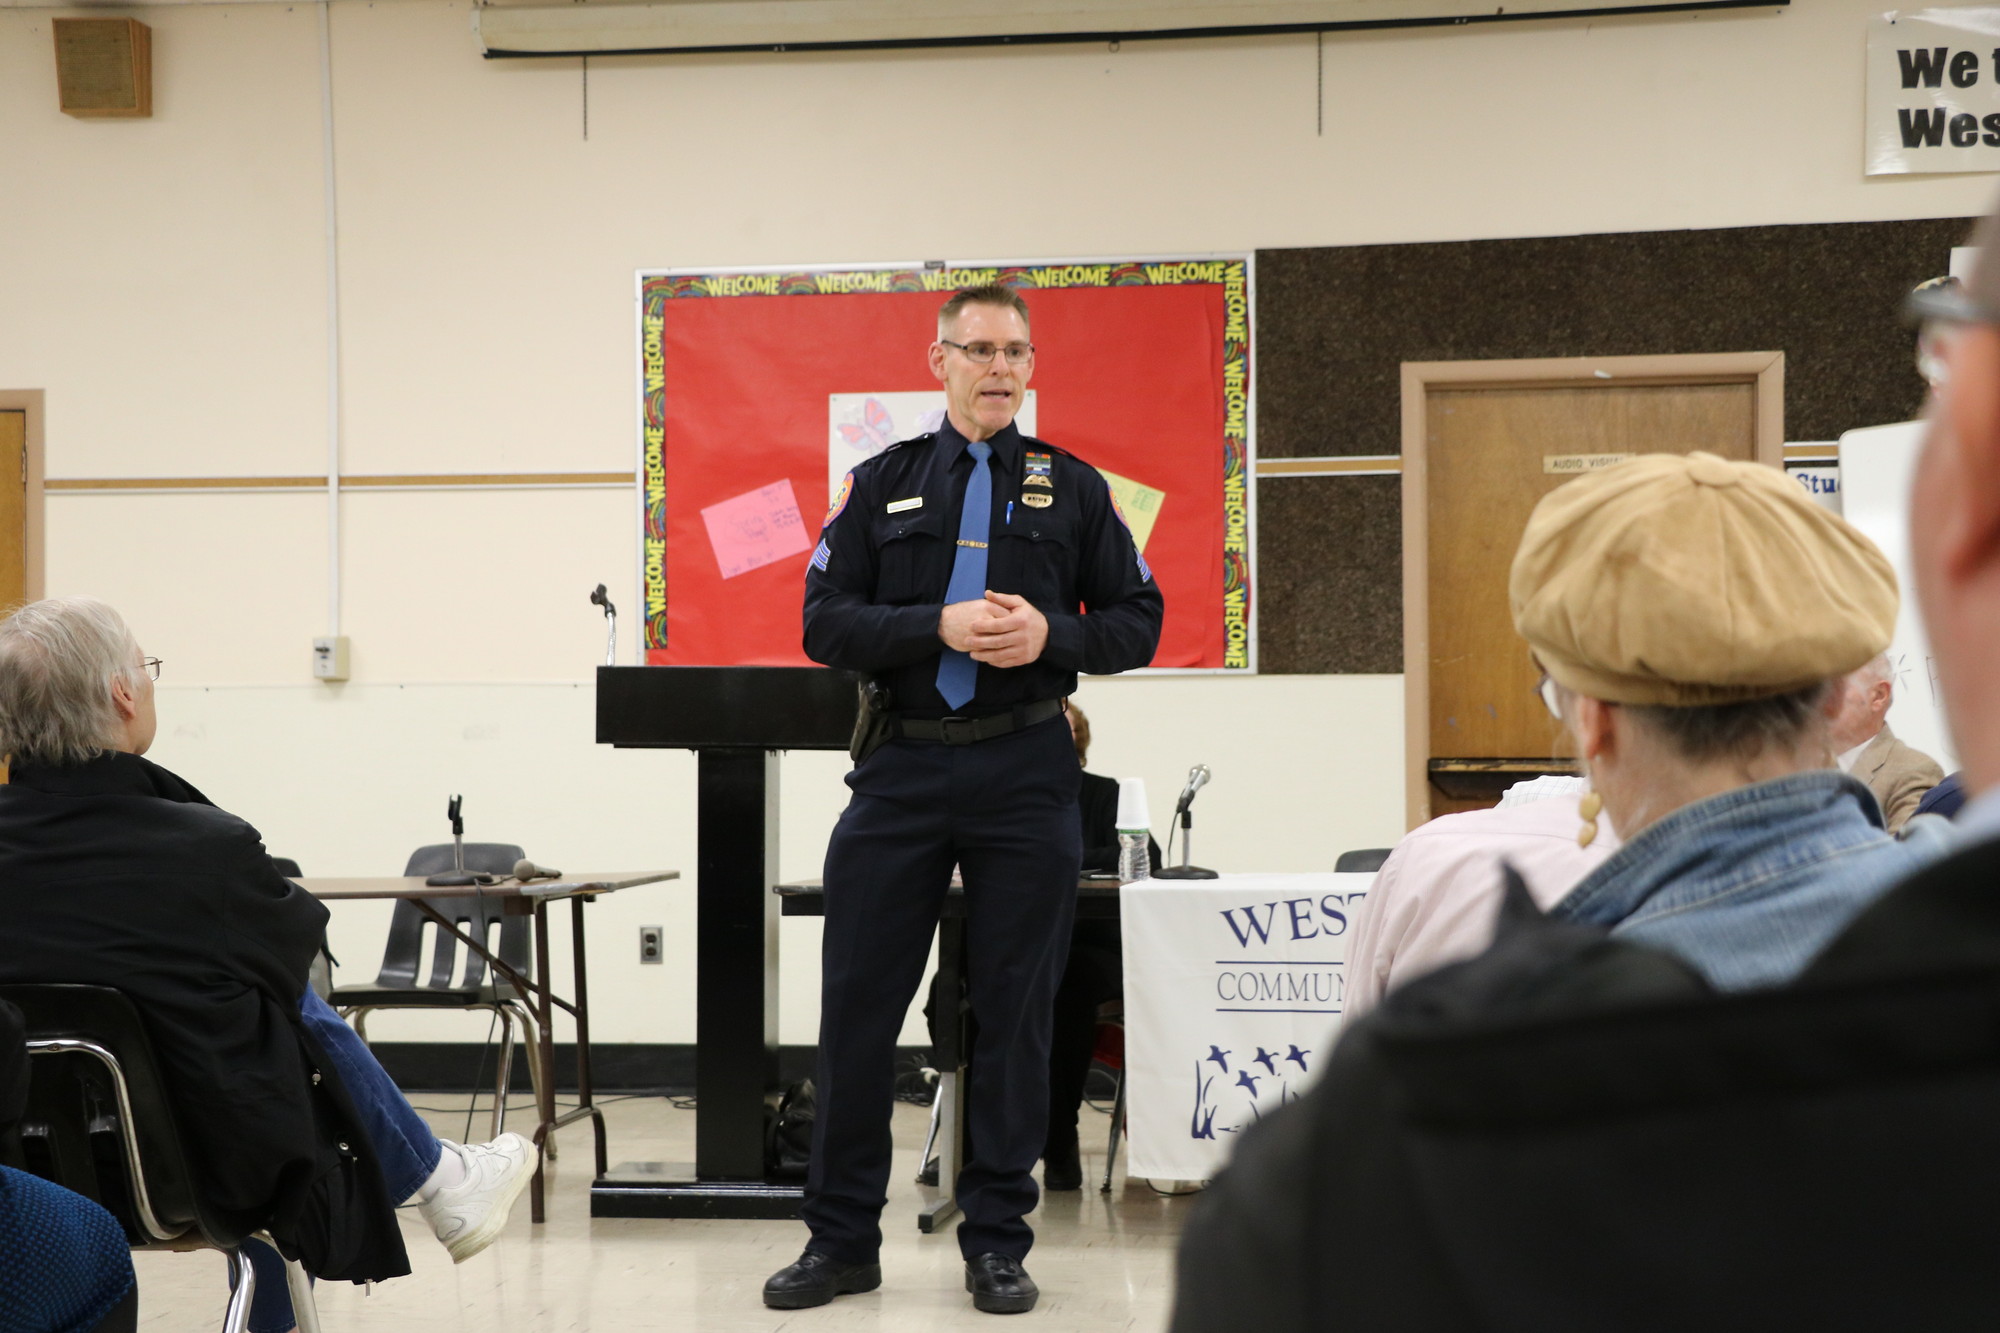 Sergeant Ed Grim of the Nassau County Police Department’s 5th Precinct addressed the crime issue in West Hempstead at the community meeting last week.